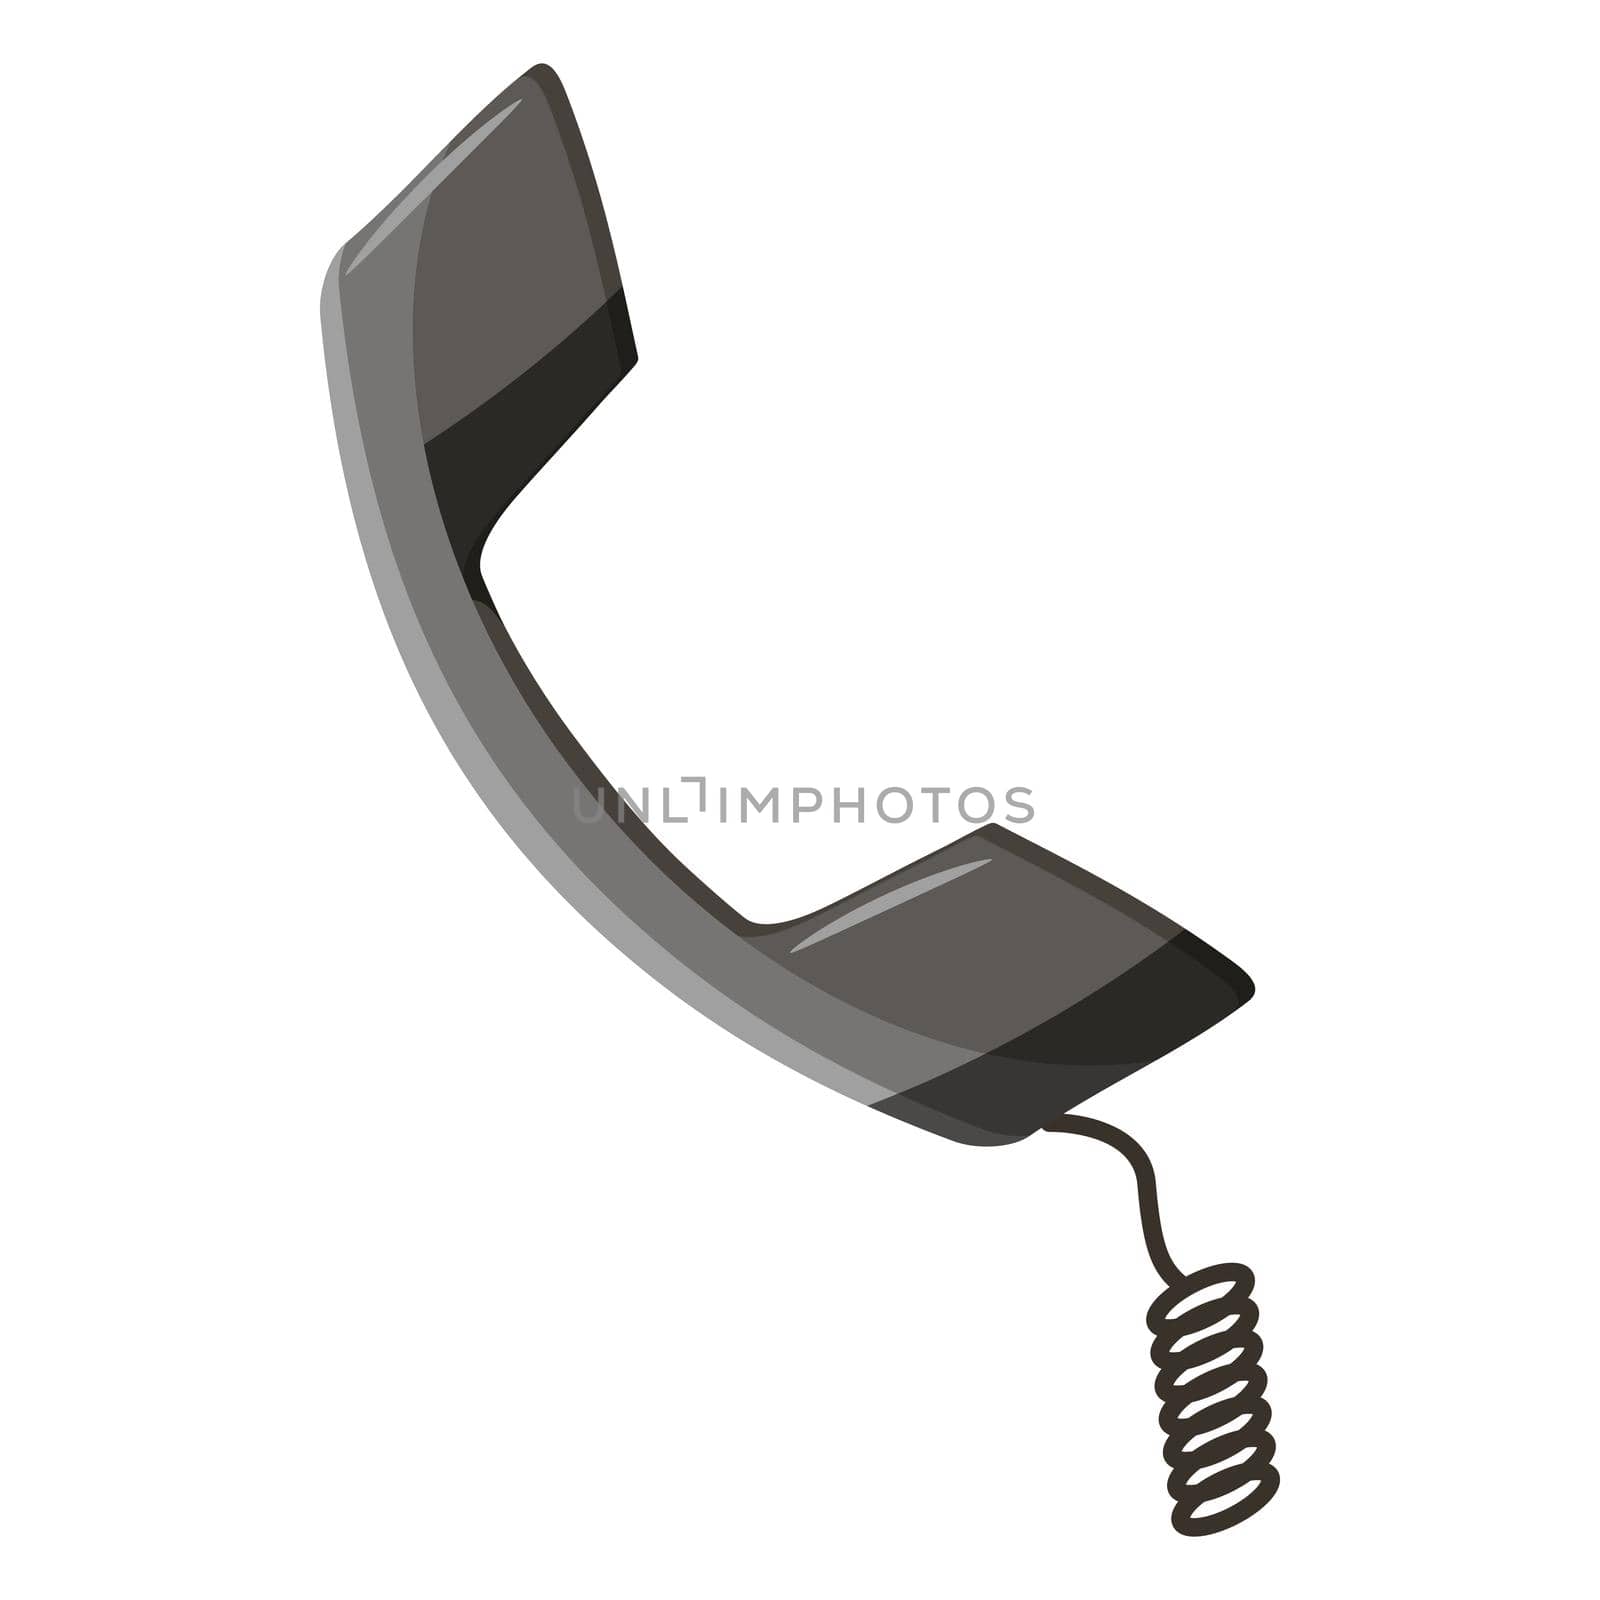 Handset icon, cartoon style by ylivdesign